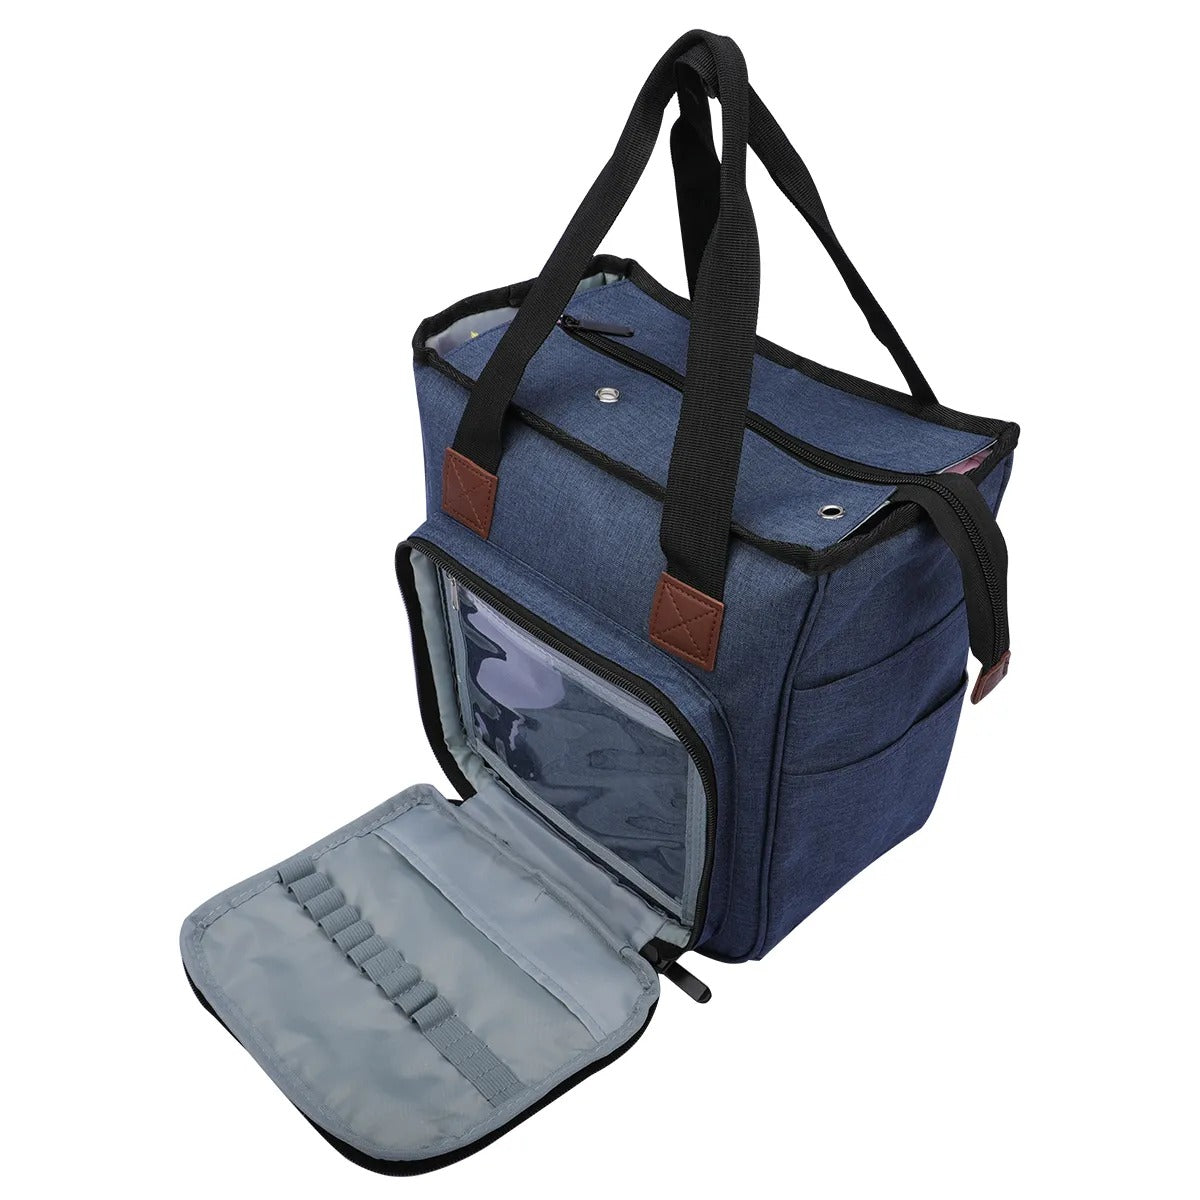 Blue Yarn Organizer Tote with front pocket open, perfect for carrying knitting essentials.